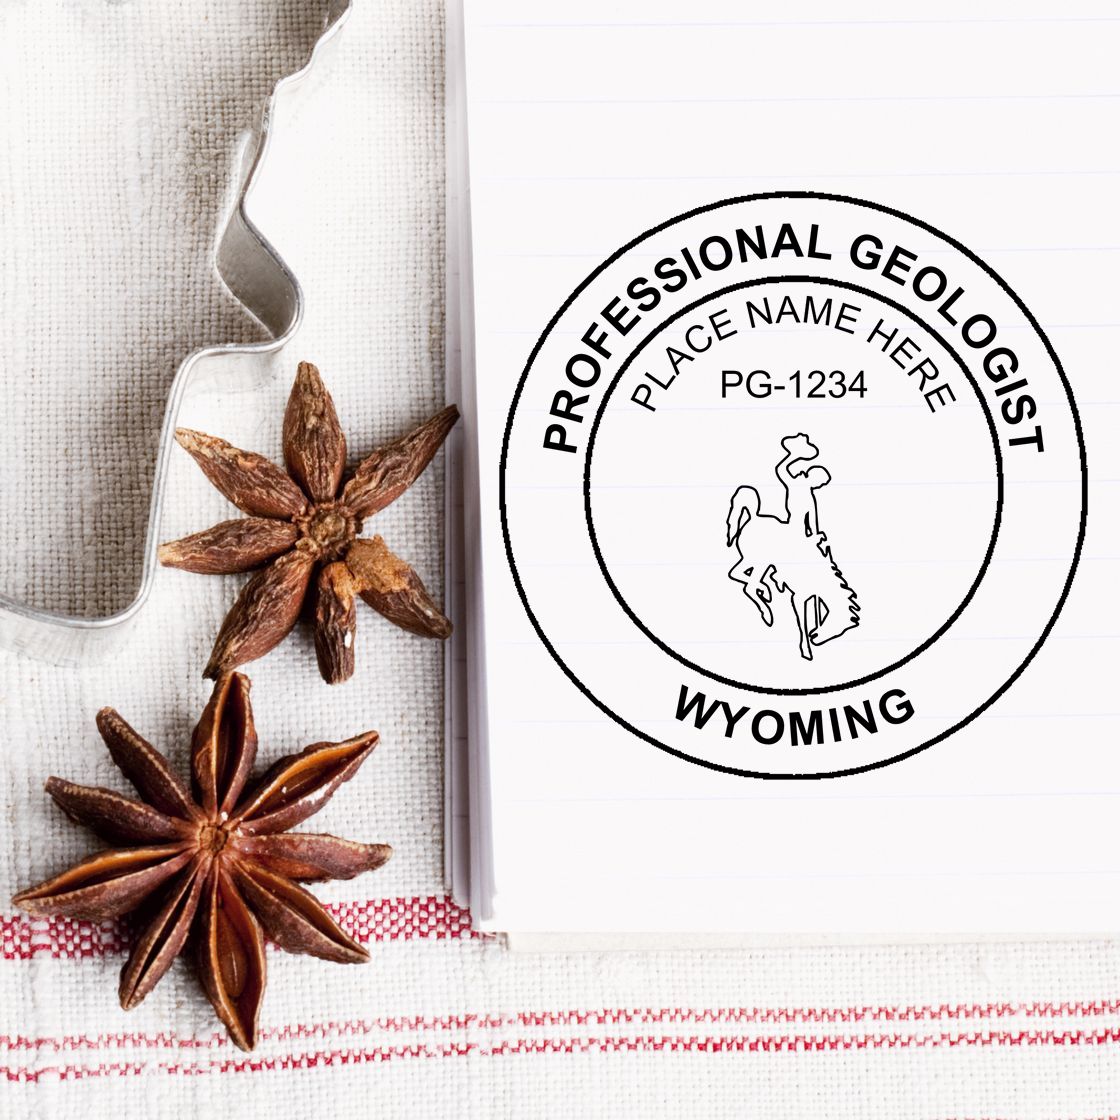 A stamped imprint of the Digital Wyoming Geologist Stamp, Electronic Seal for Wyoming Geologist in this stylish lifestyle photo, setting the tone for a unique and personalized product.